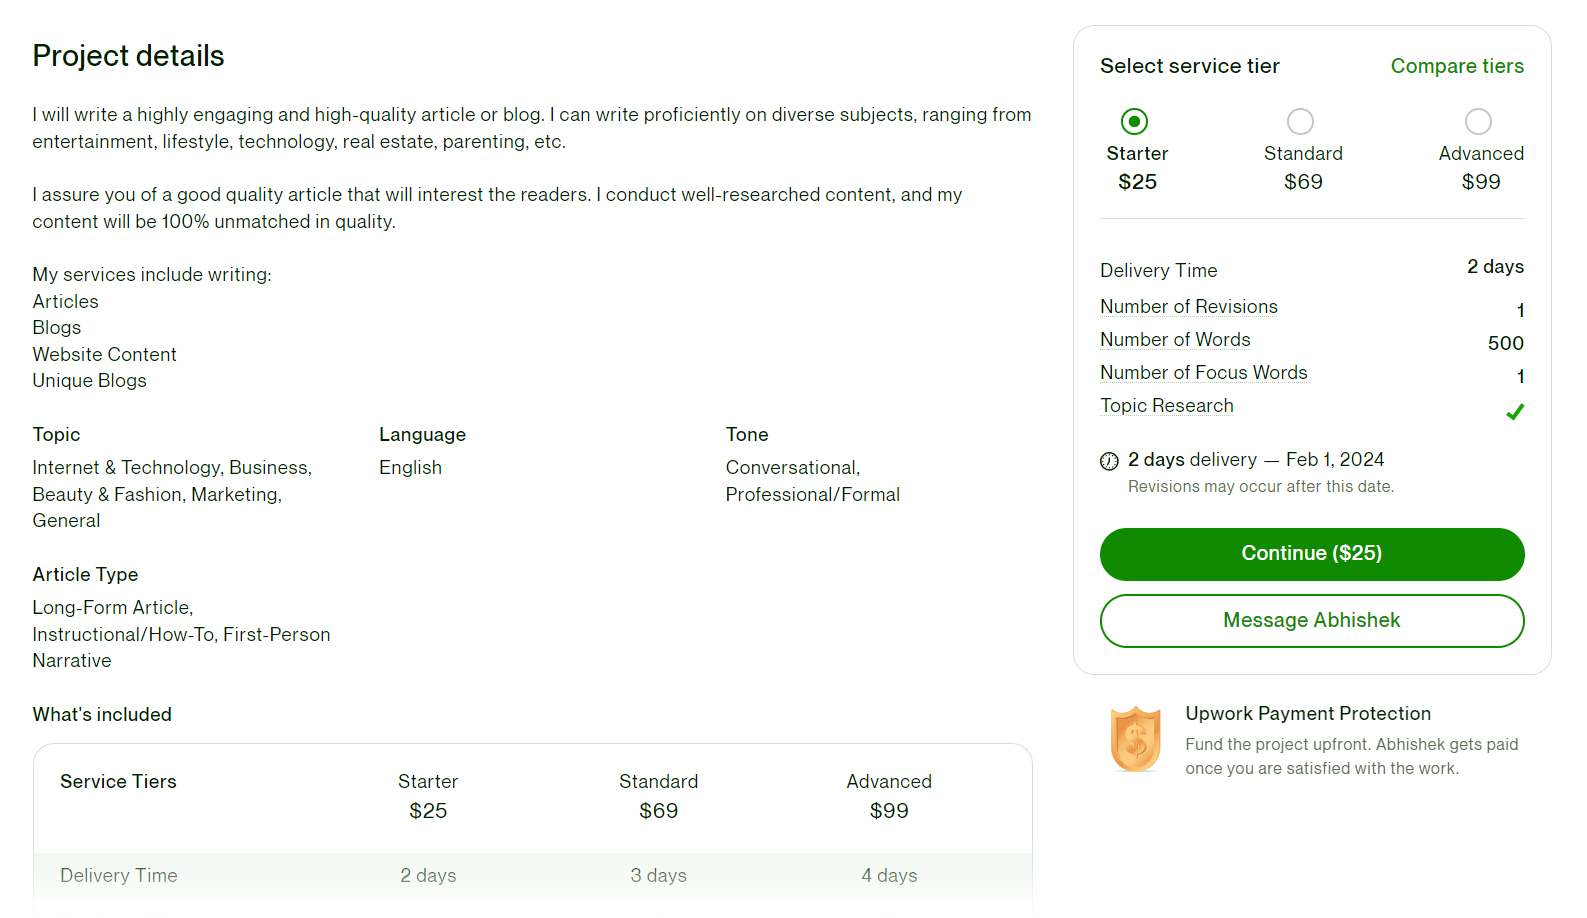 A "Project details" page for a selected project in Upwork